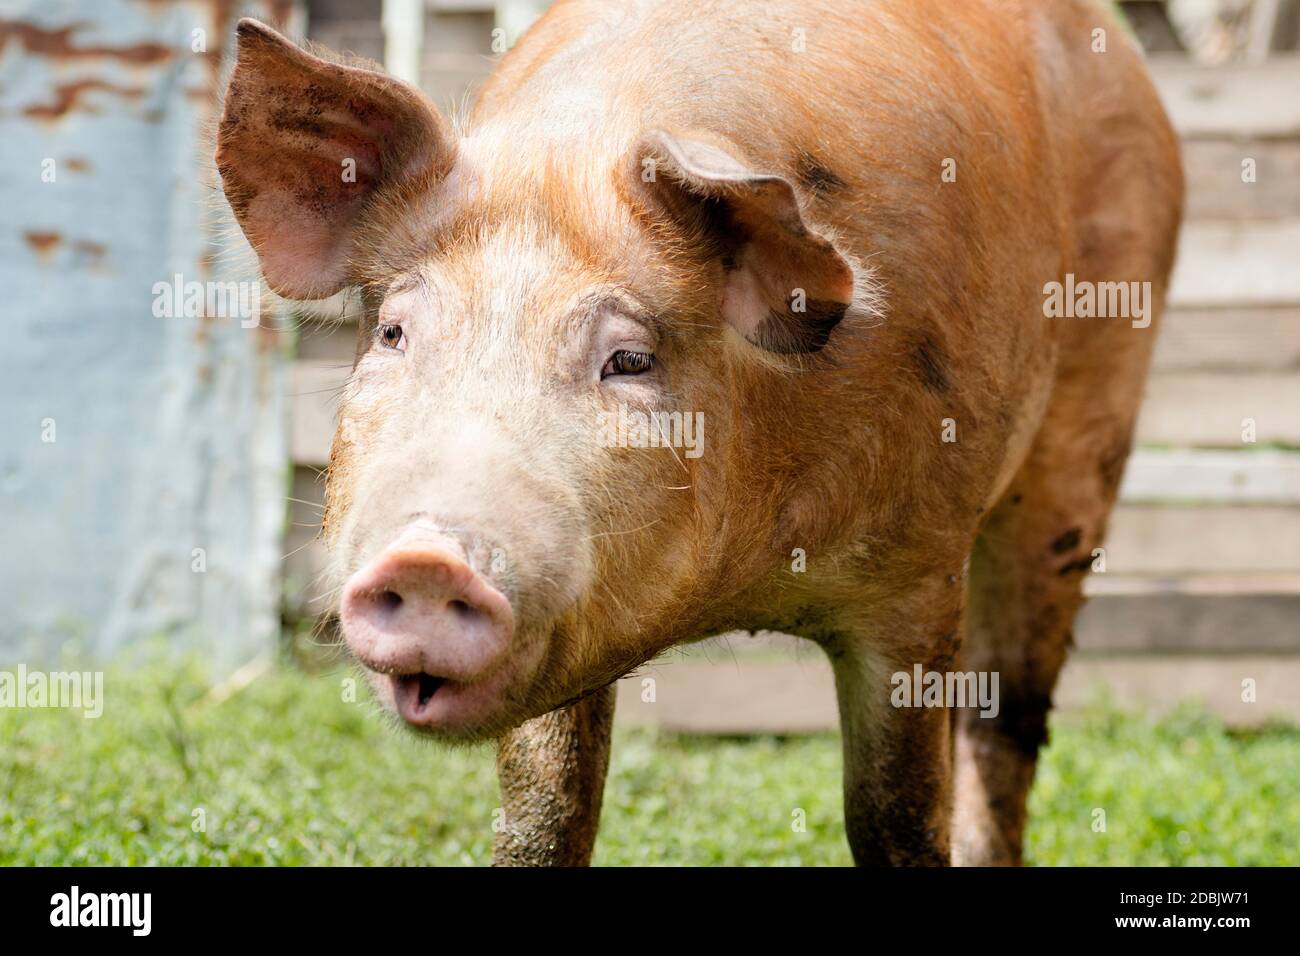 The domestic red pig is doing funny grimace, pig breeding and agriculture concept. Stock Photo